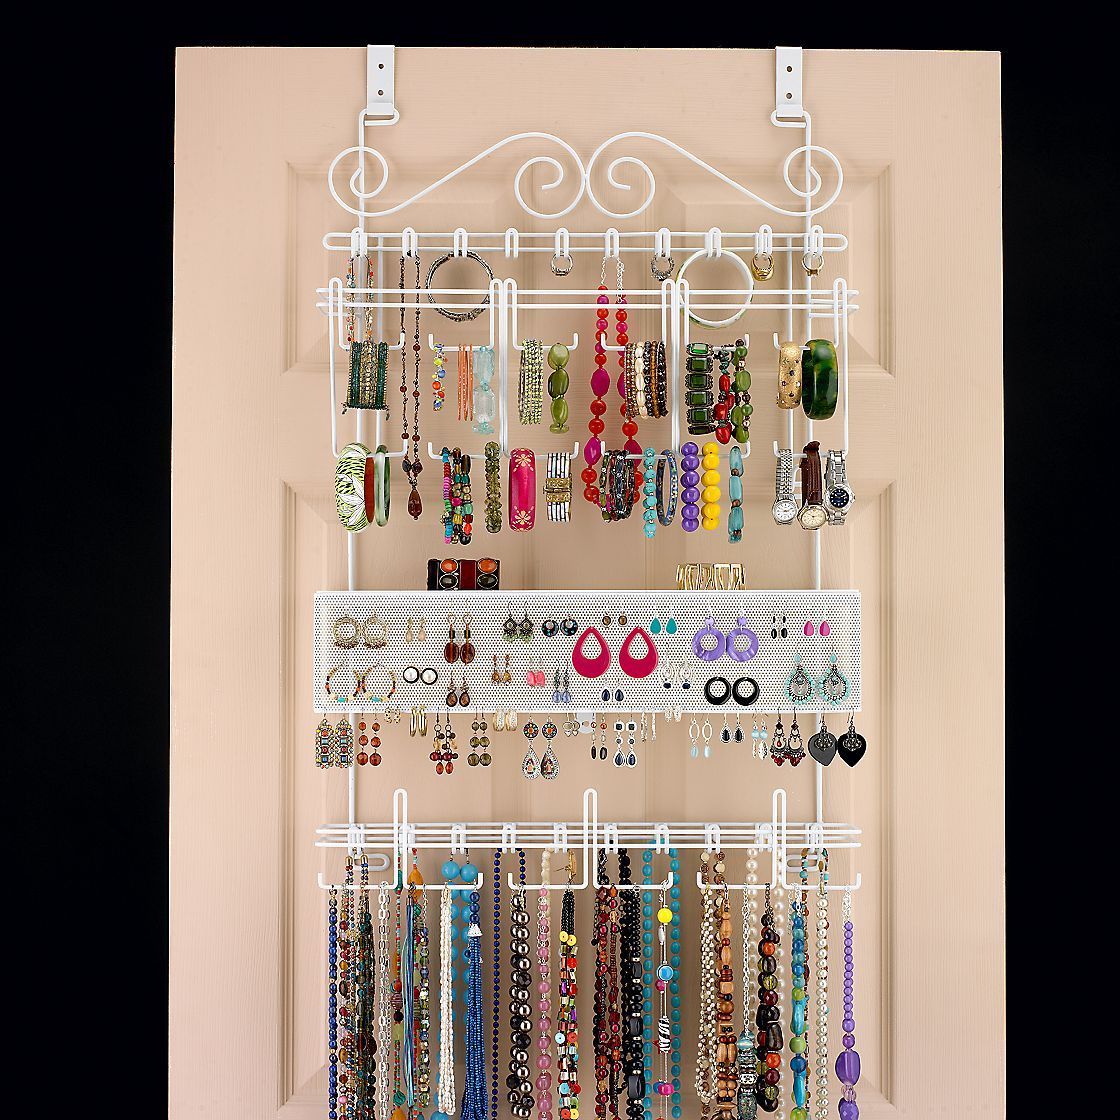 over the door/wall jewelry organizer from the company store